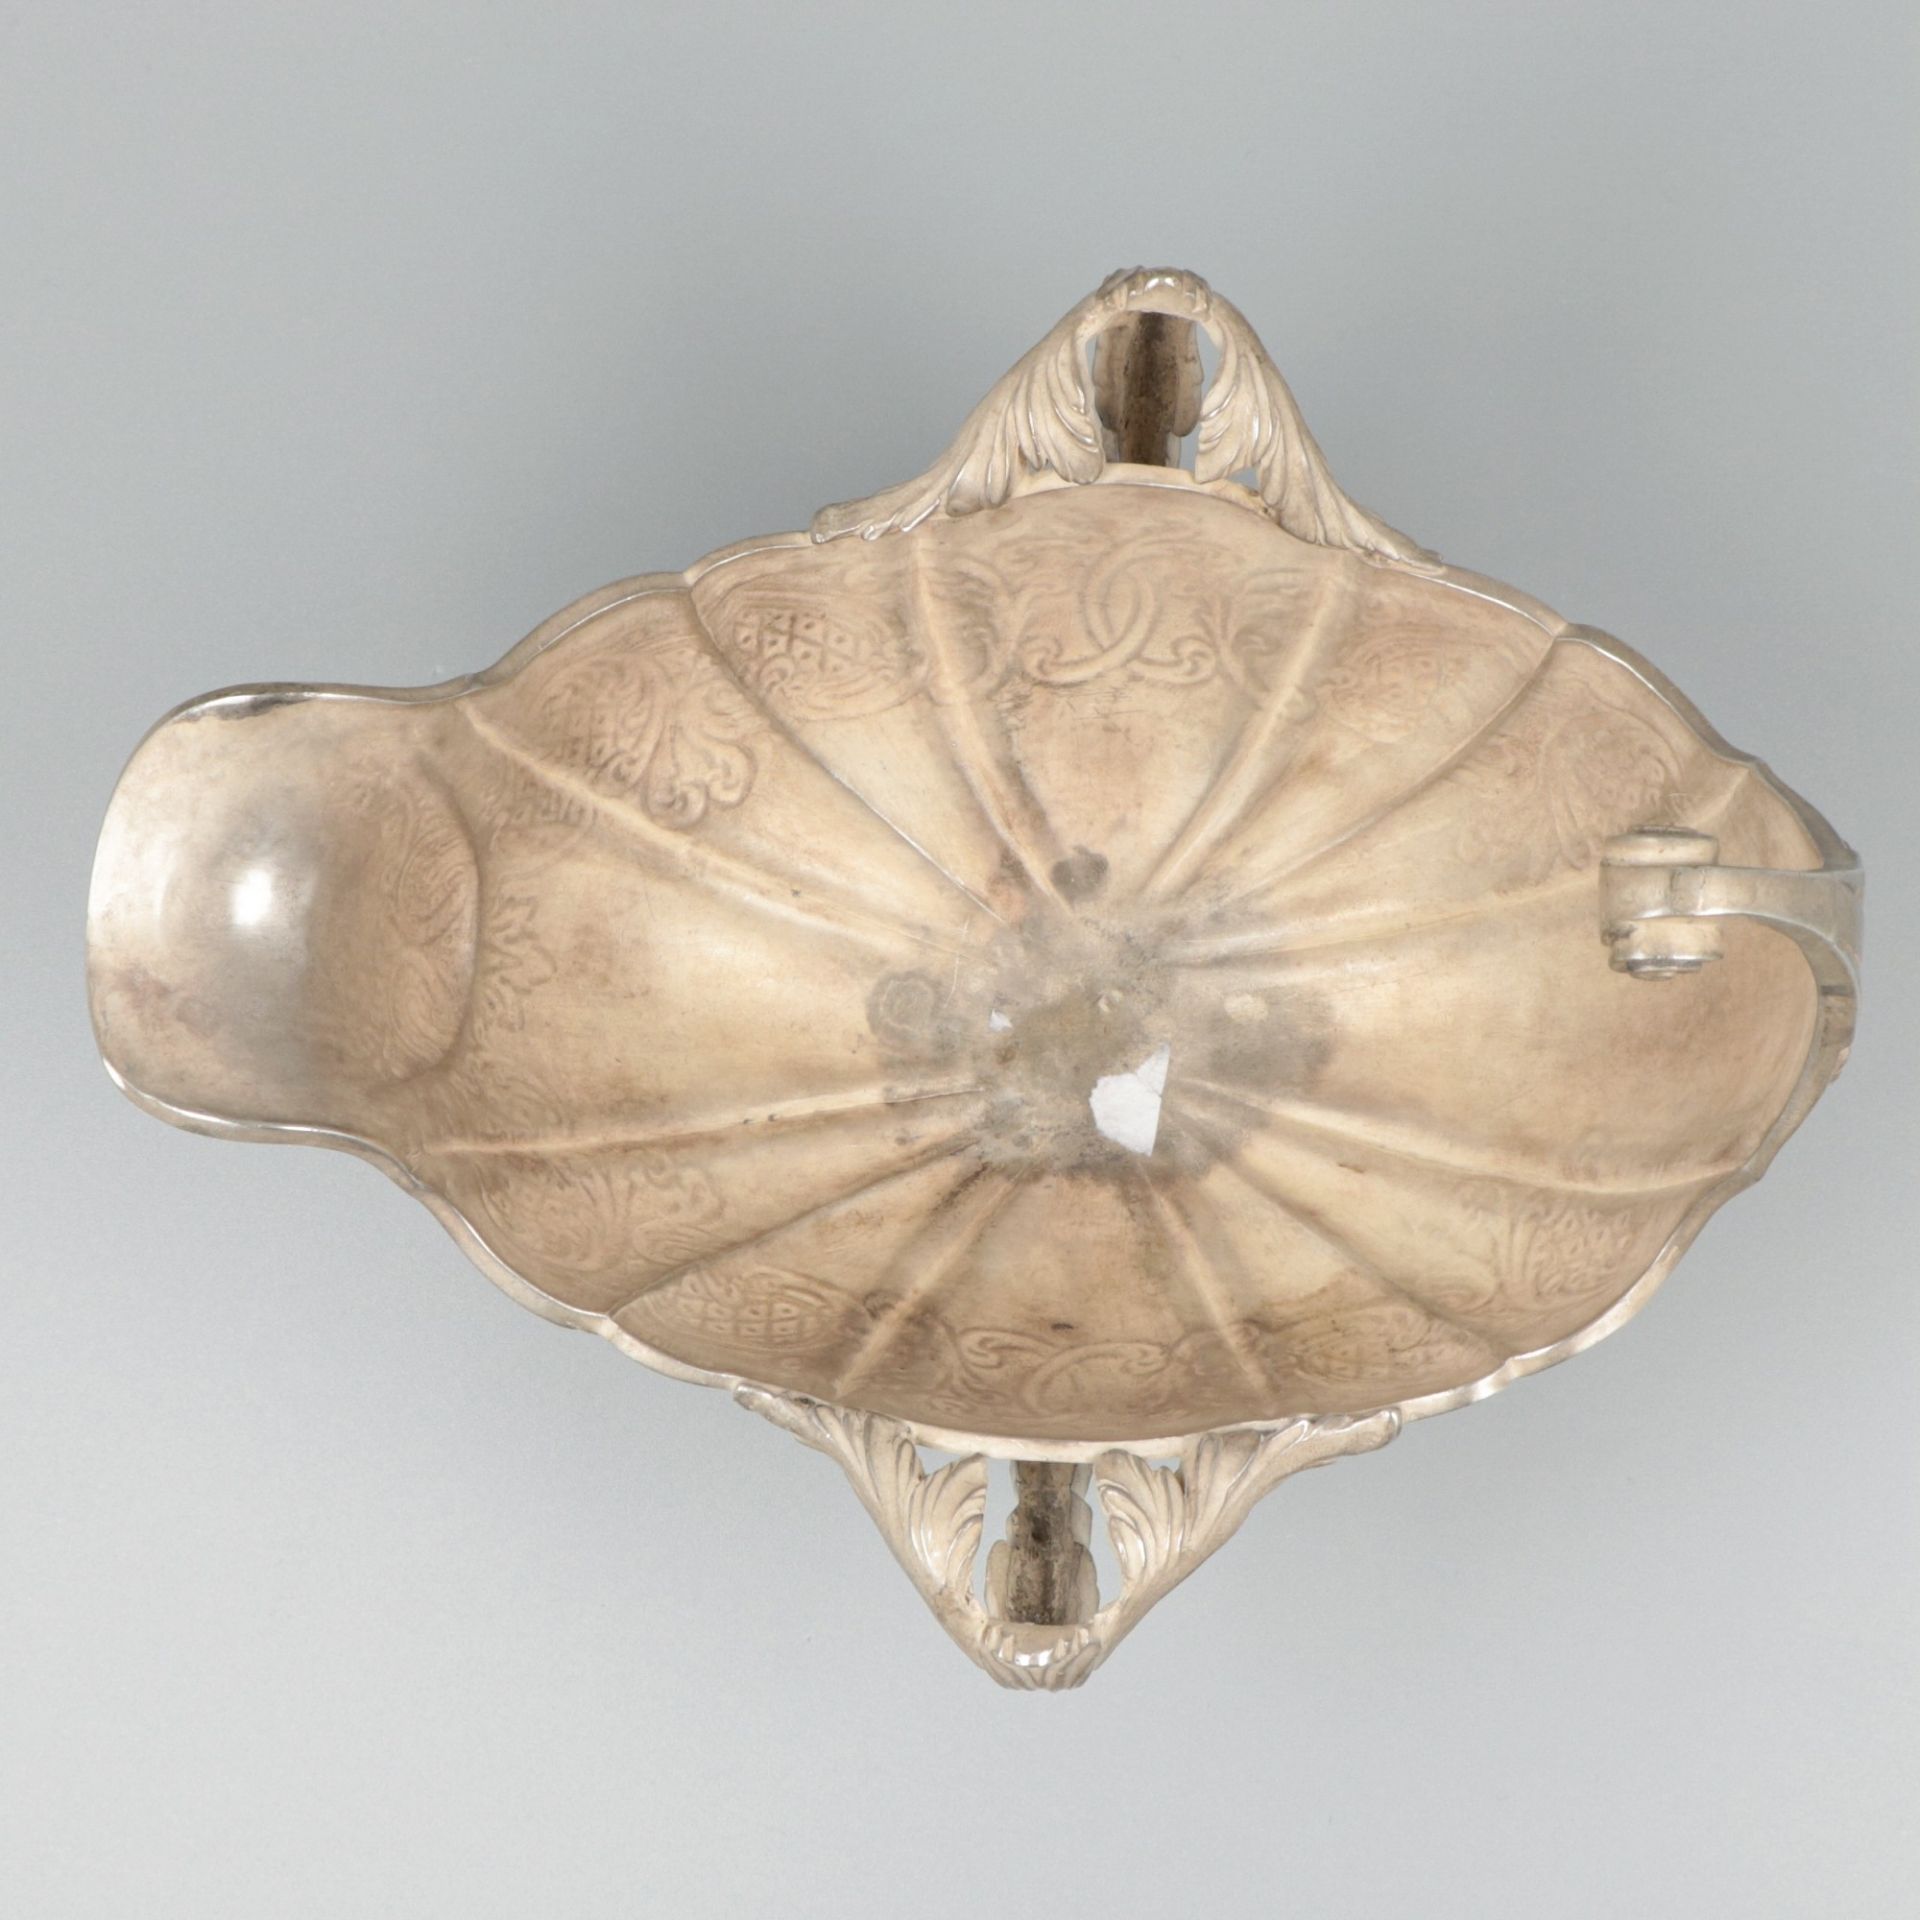 Saucière / sauce boat silver. - Image 4 of 9